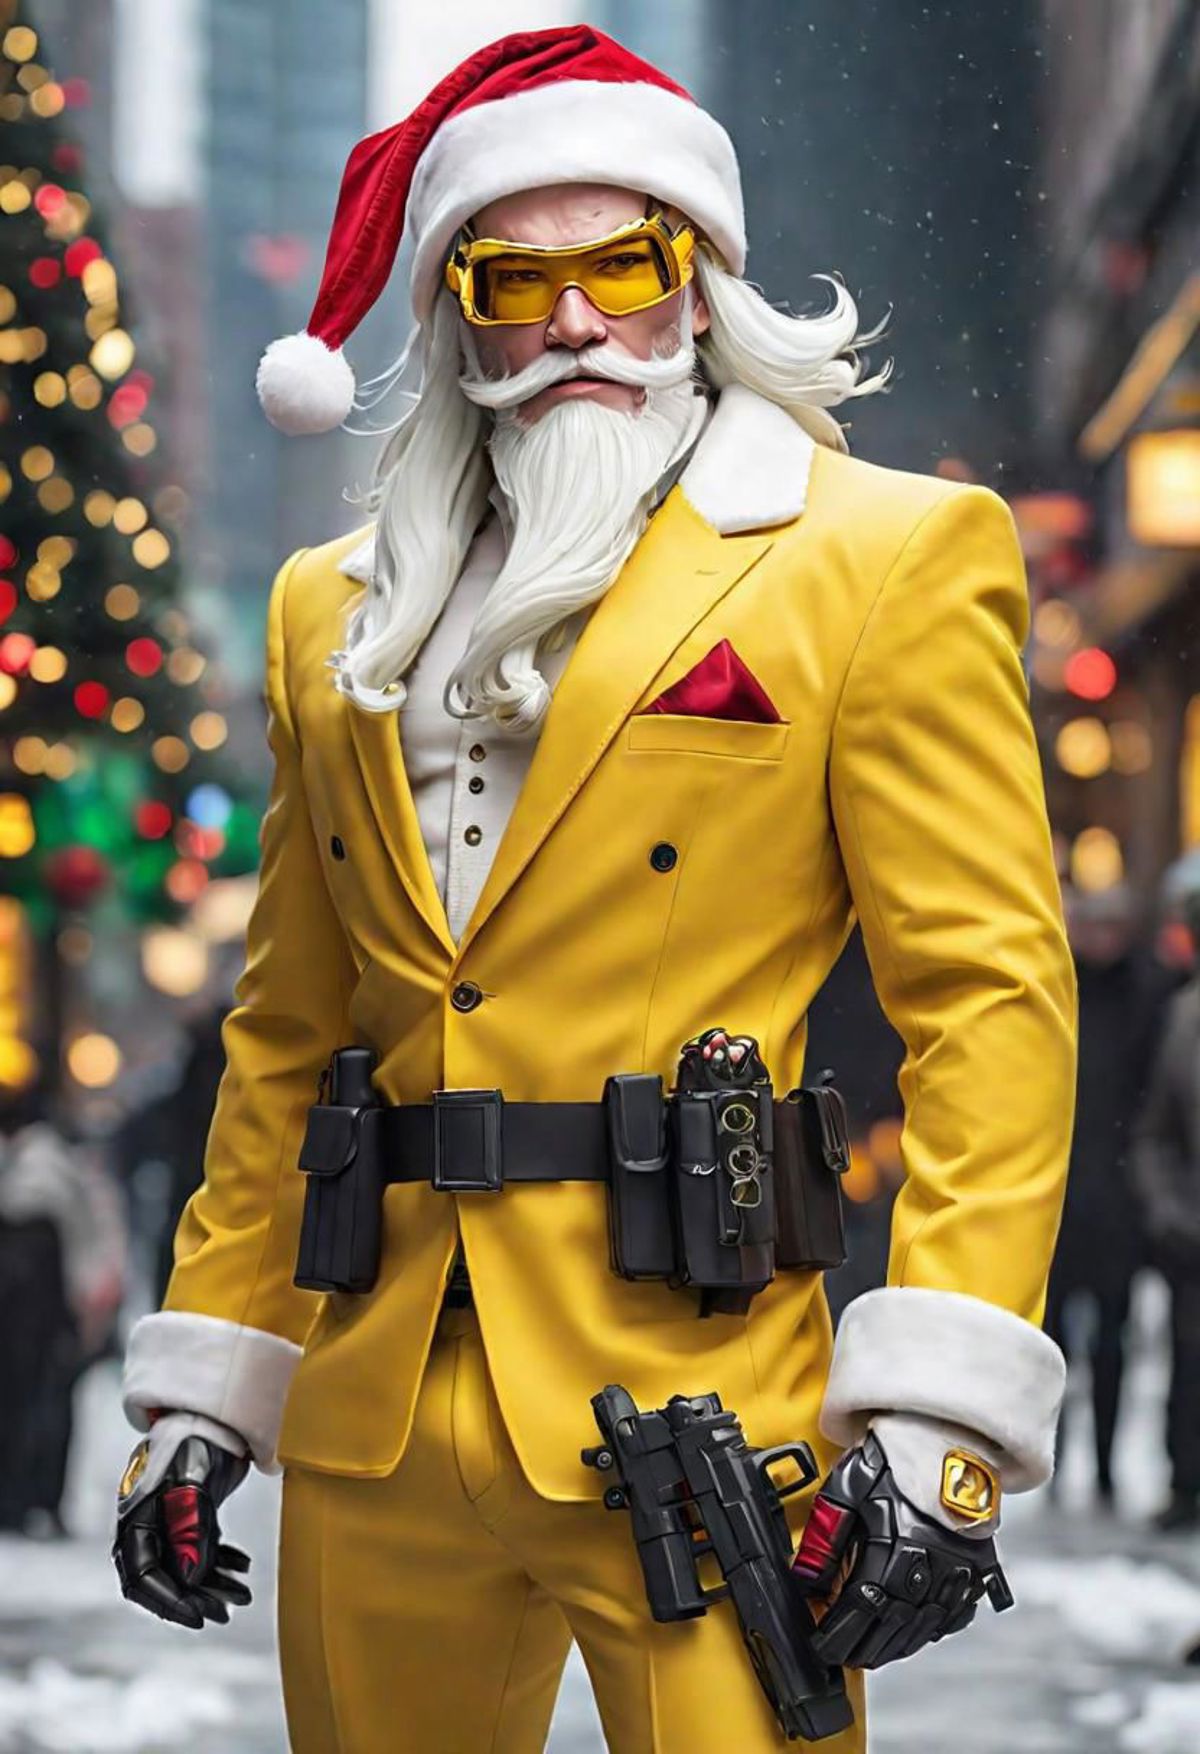 A man dressed in a yellow suit and a Santa hat holding a gun.